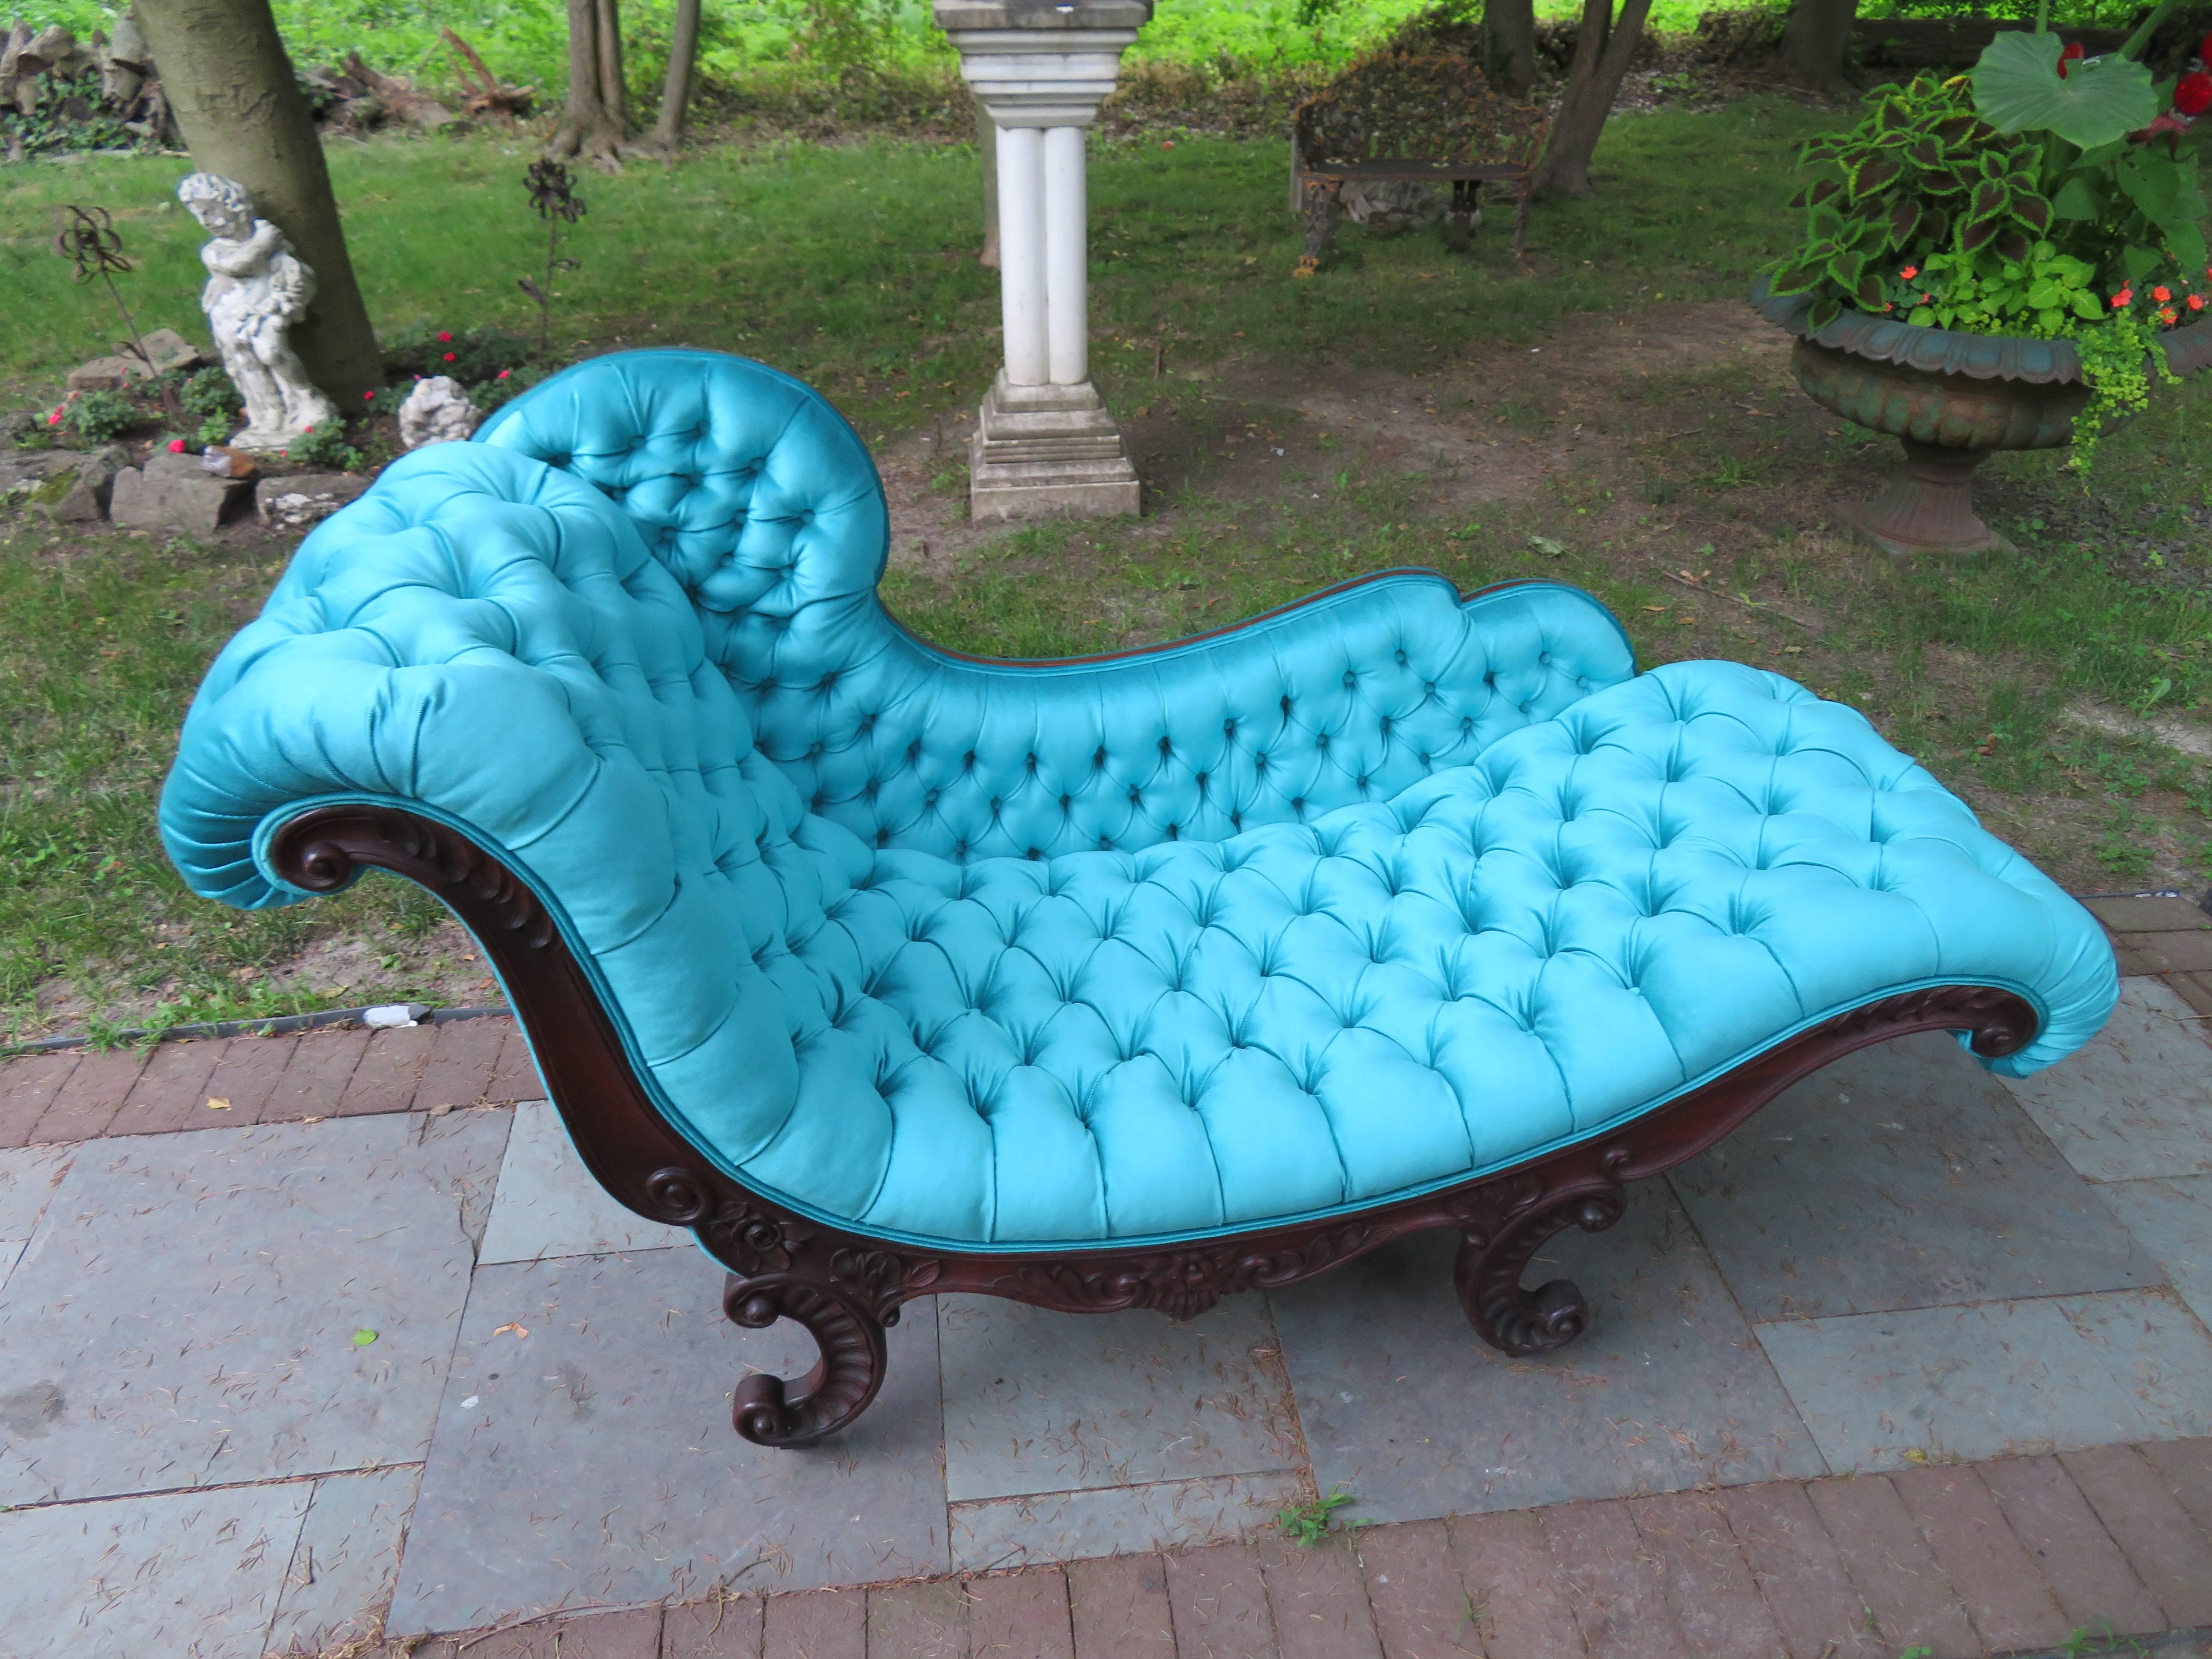 Magnificent Victorian John Henry Belter attributed rosewood tufted chase lounge. This piece has been reupholstered in a scrumptious high end peacock blue velvet and looks amazing. All of the foam and inner workings have been replaced making this